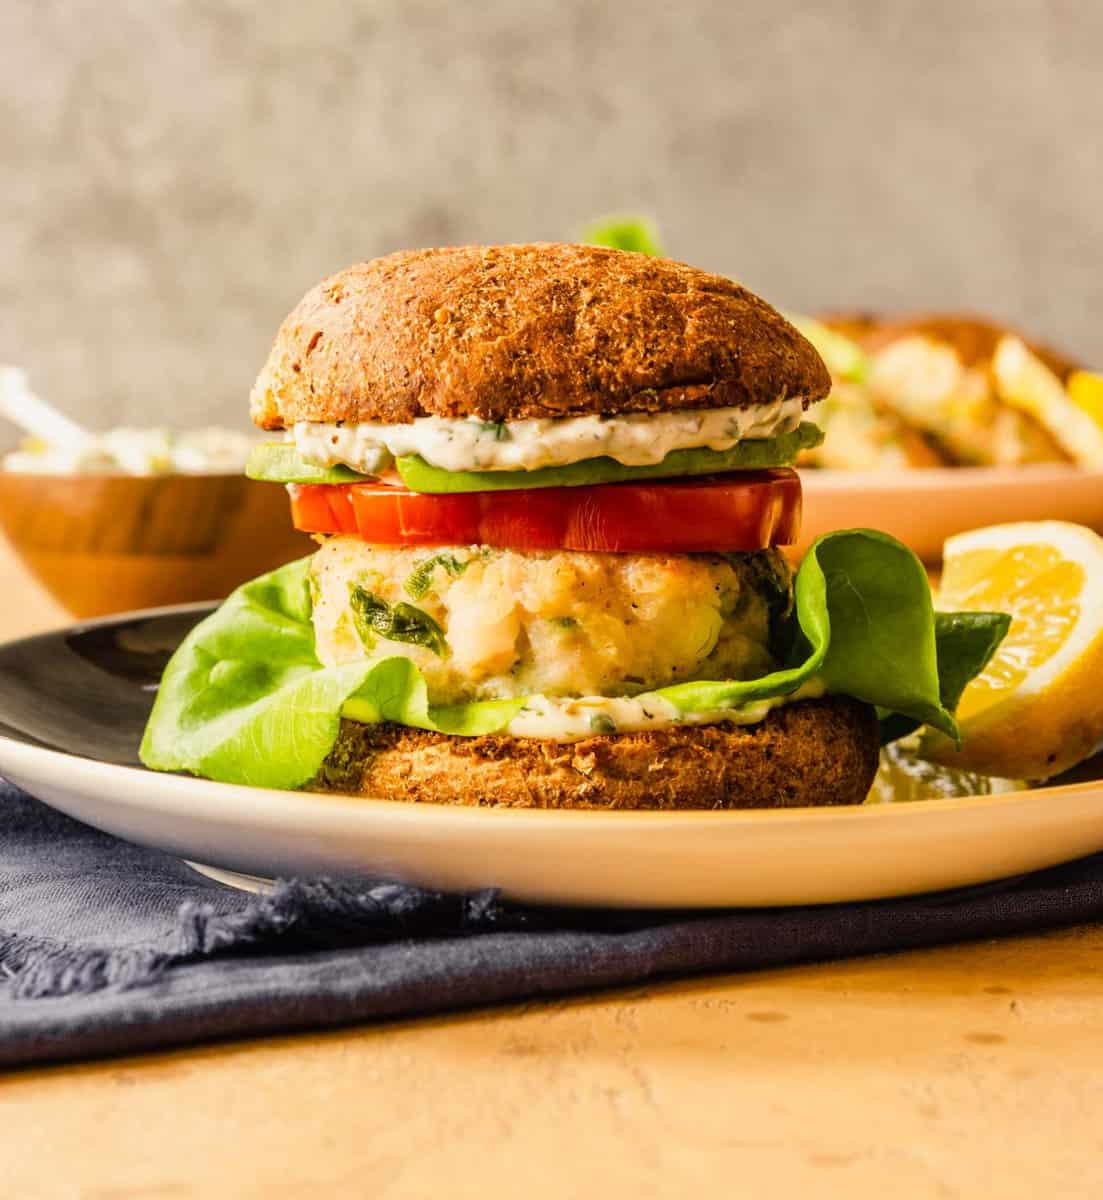 shrimp burger on a whole-wheat bun layered with lettuce leaves, a tomato slice, sauce and avocado slices